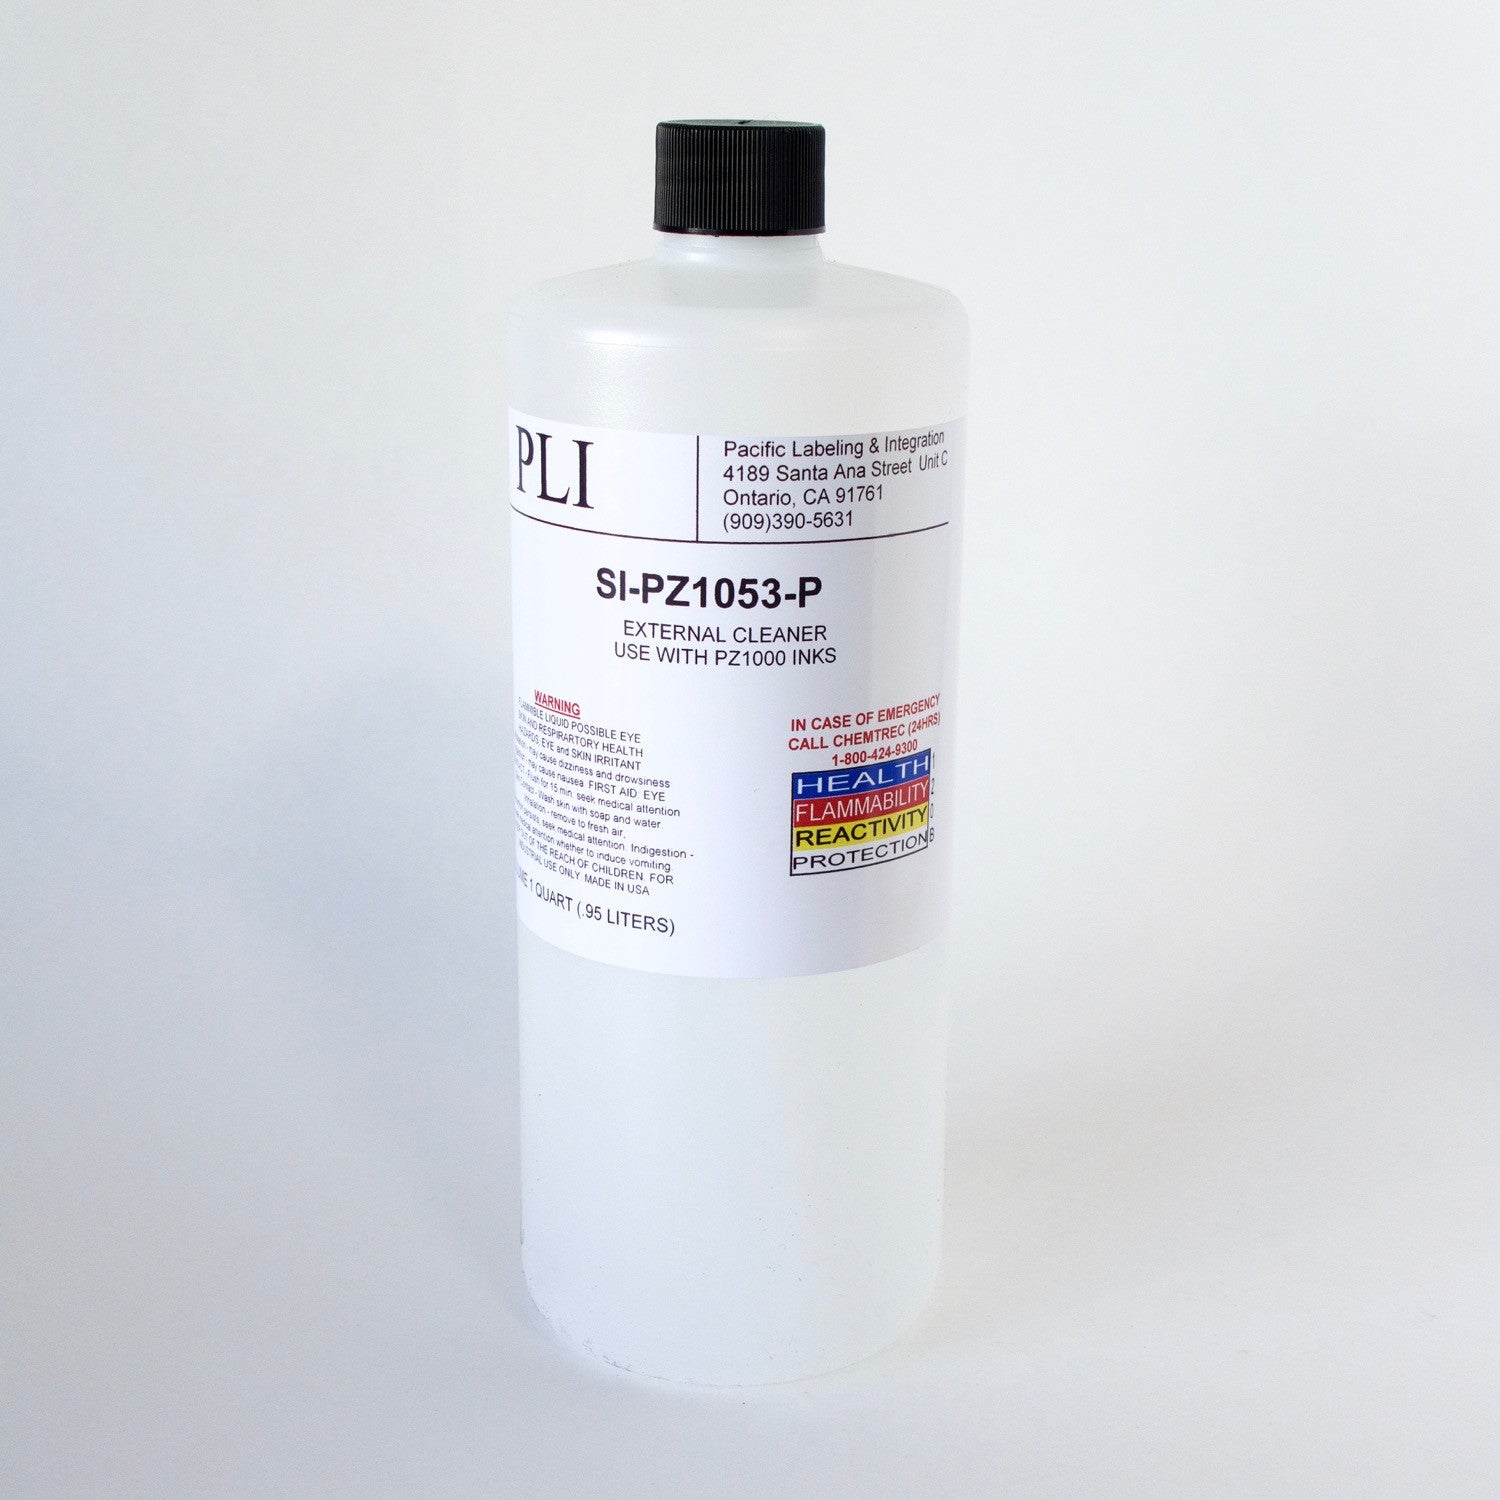 External Cleaner Oil Based Remover (SI-PZ1053-P)